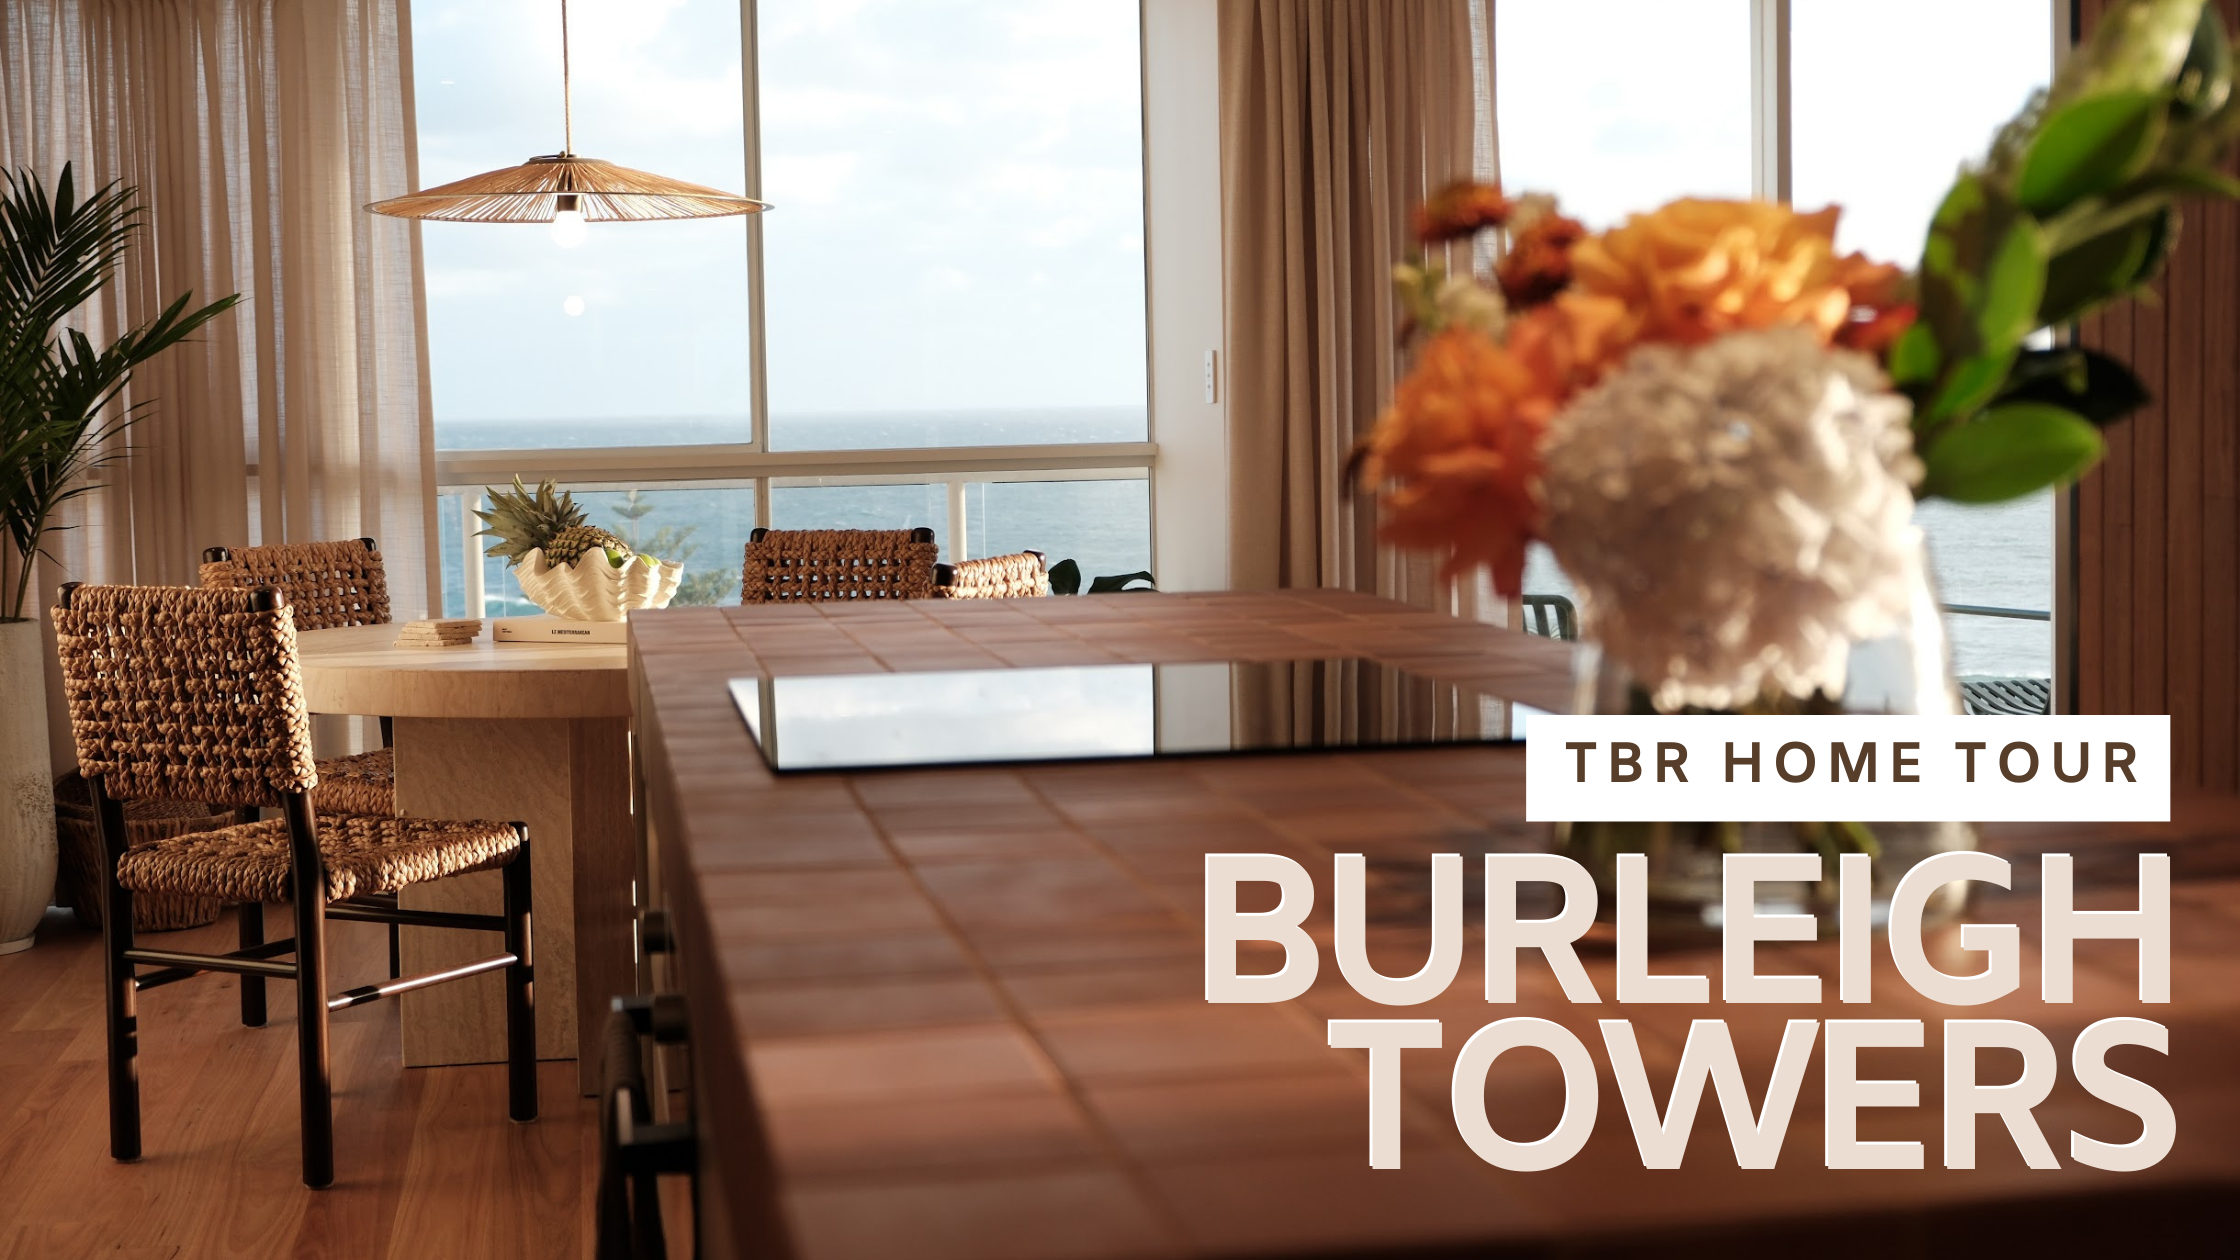 TBR HOME TOUR  BURLEIGH TOWERS (2).png__PID:29baa842-1f2e-41f5-8ce3-c6457c092a64